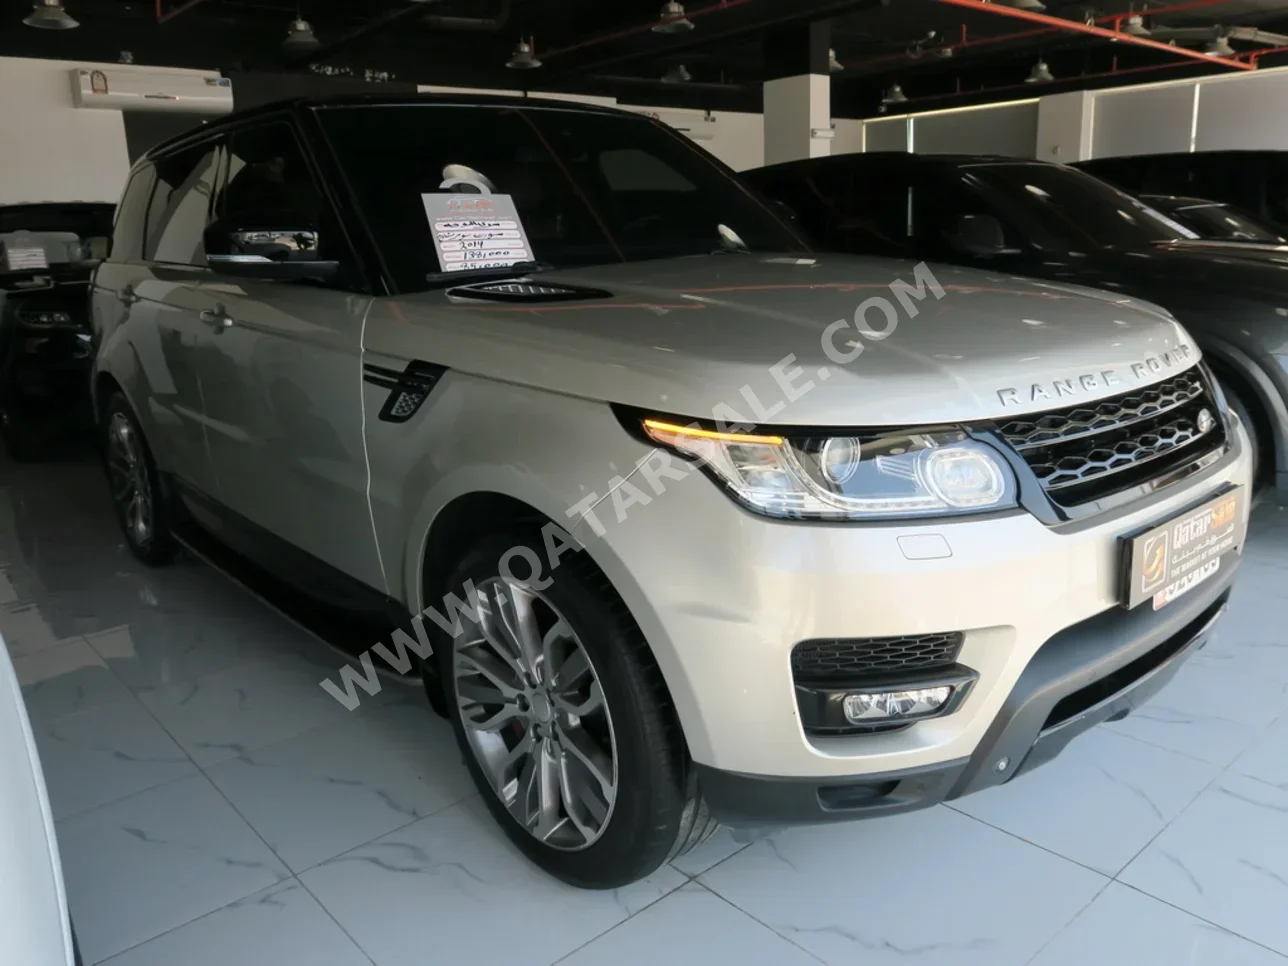 Land Rover  Range Rover  Sport Super charged  2014  Automatic  138,000 Km  8 Cylinder  Four Wheel Drive (4WD)  SUV  Gold